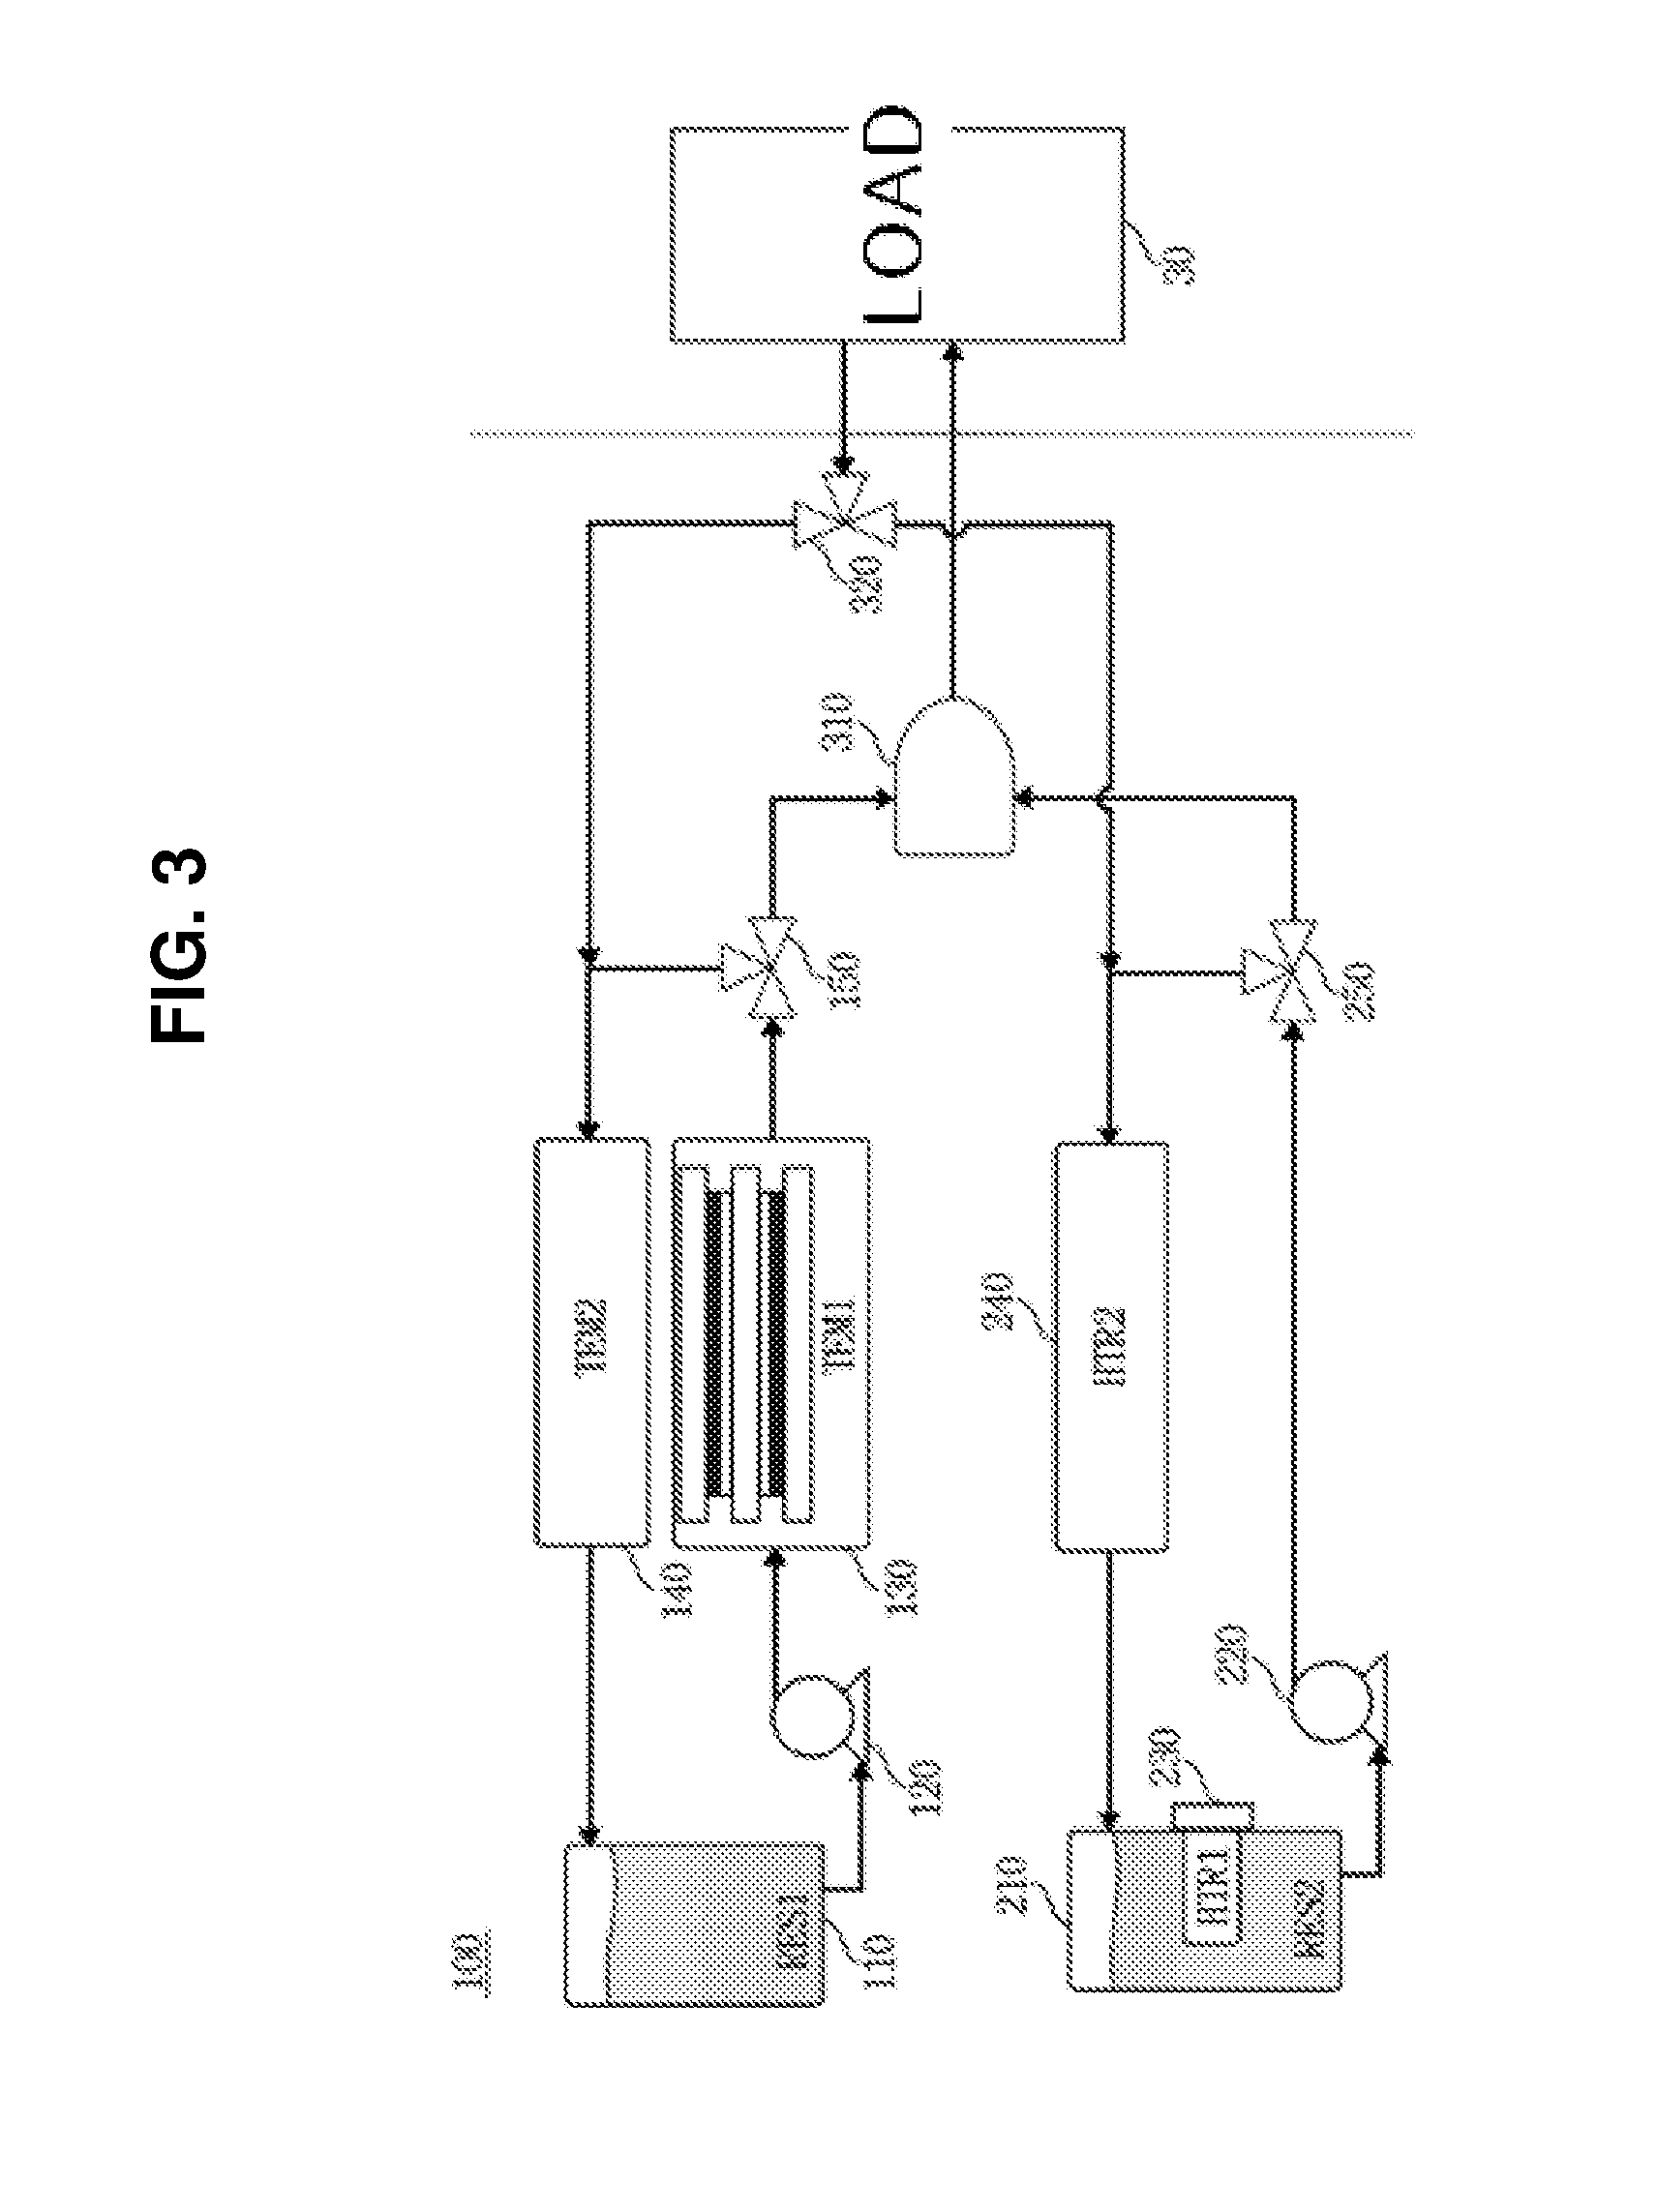 Temperature control system for semiconductor manufacturing system